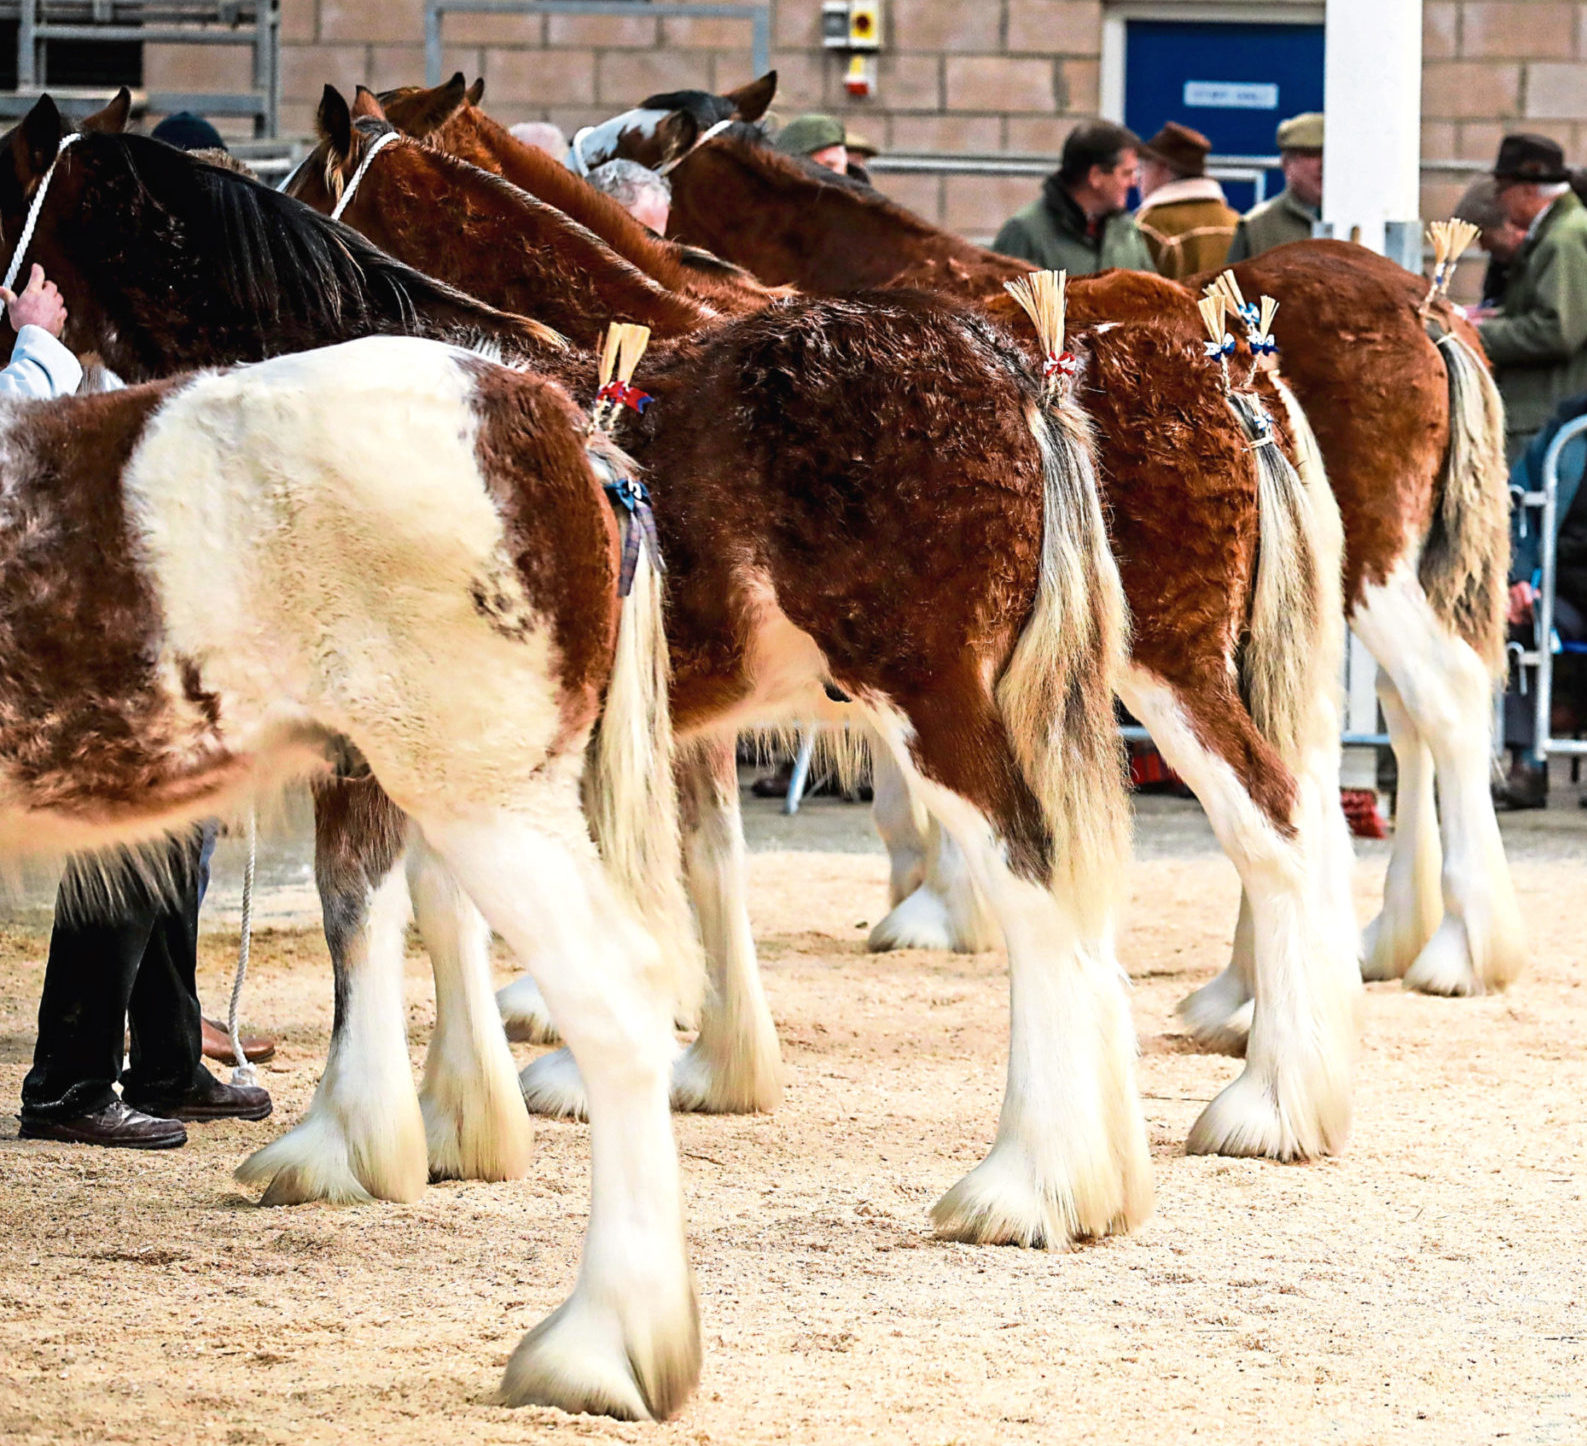 The Clydesdale judging is a major draw at horse events.